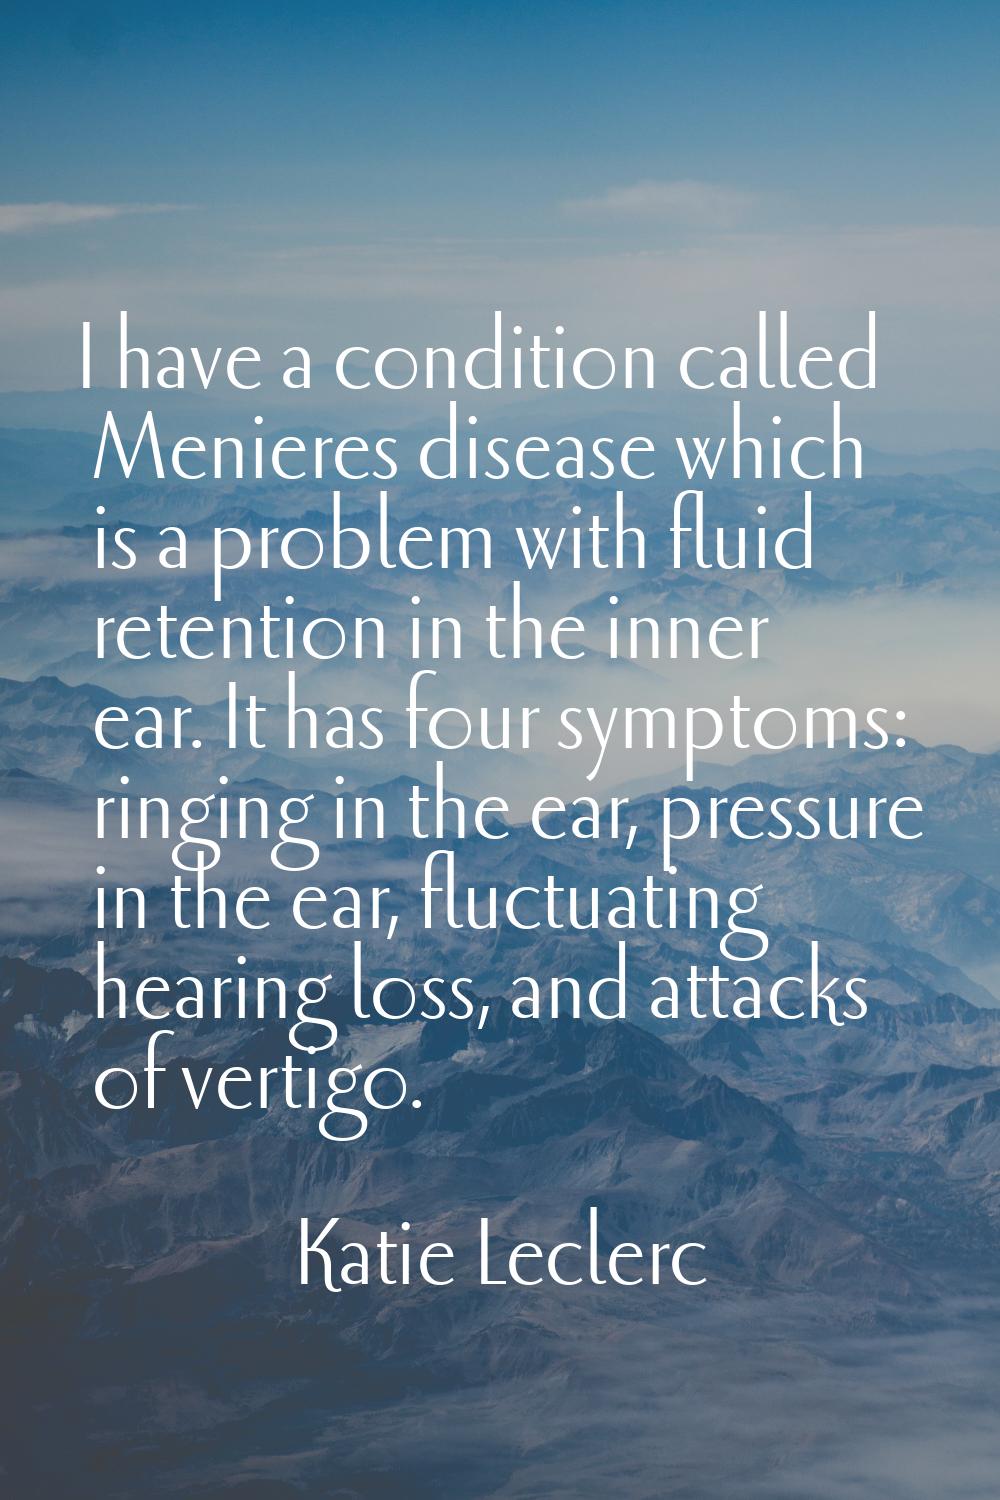 I have a condition called Menieres disease which is a problem with fluid retention in the inner ear